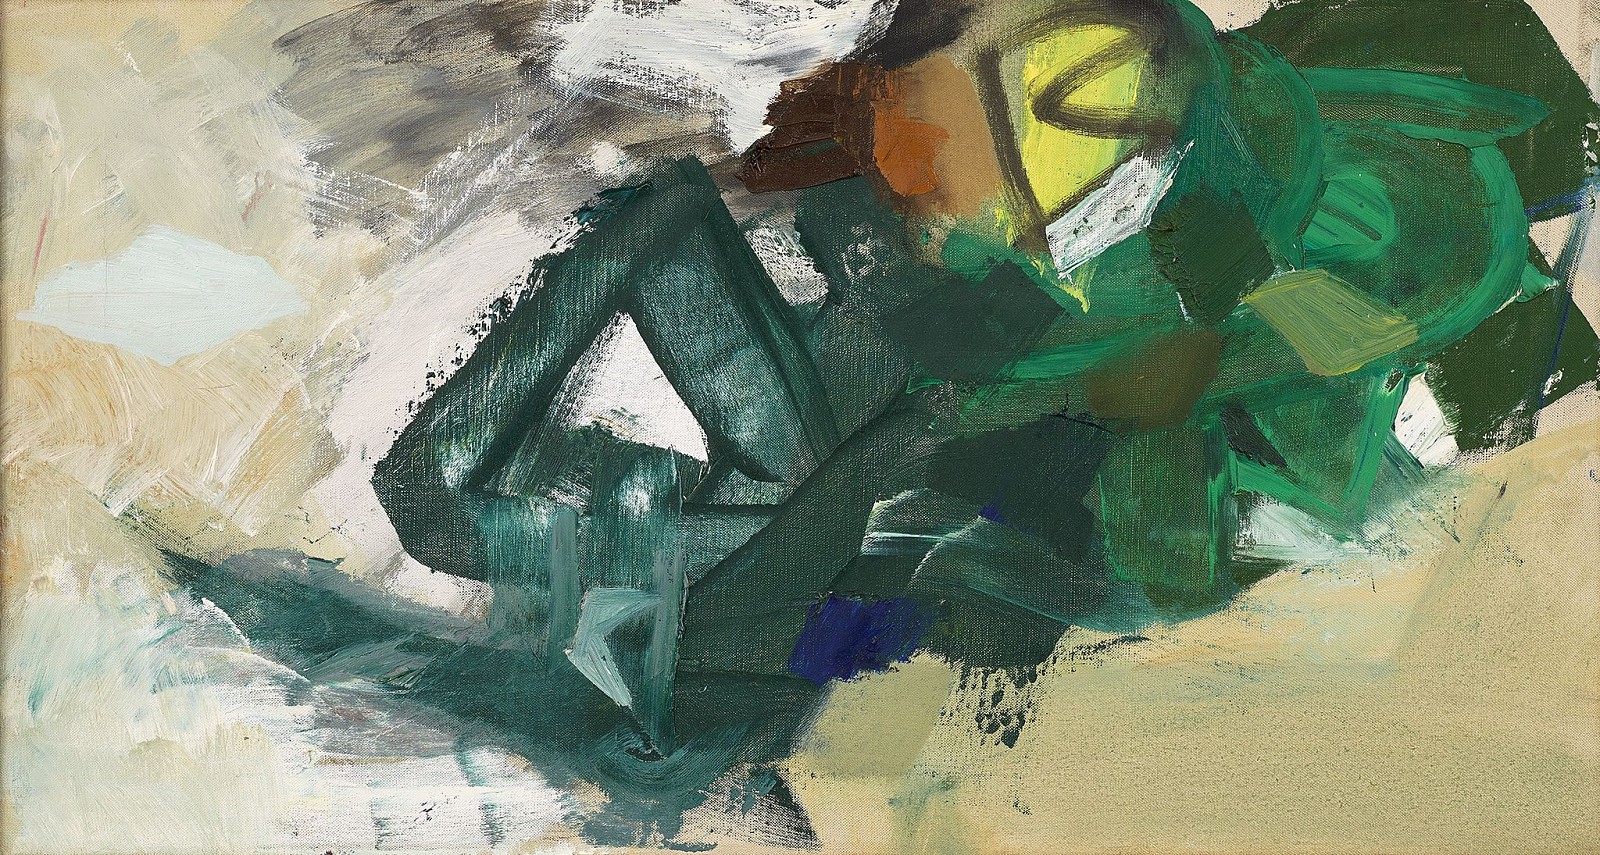 Yvonne Thomas, Stream | SOLD, 1960
Oil on canvas, 16 x 29 1/2 in. (40.6 x 74.9 cm)
SOLD
THO-00038